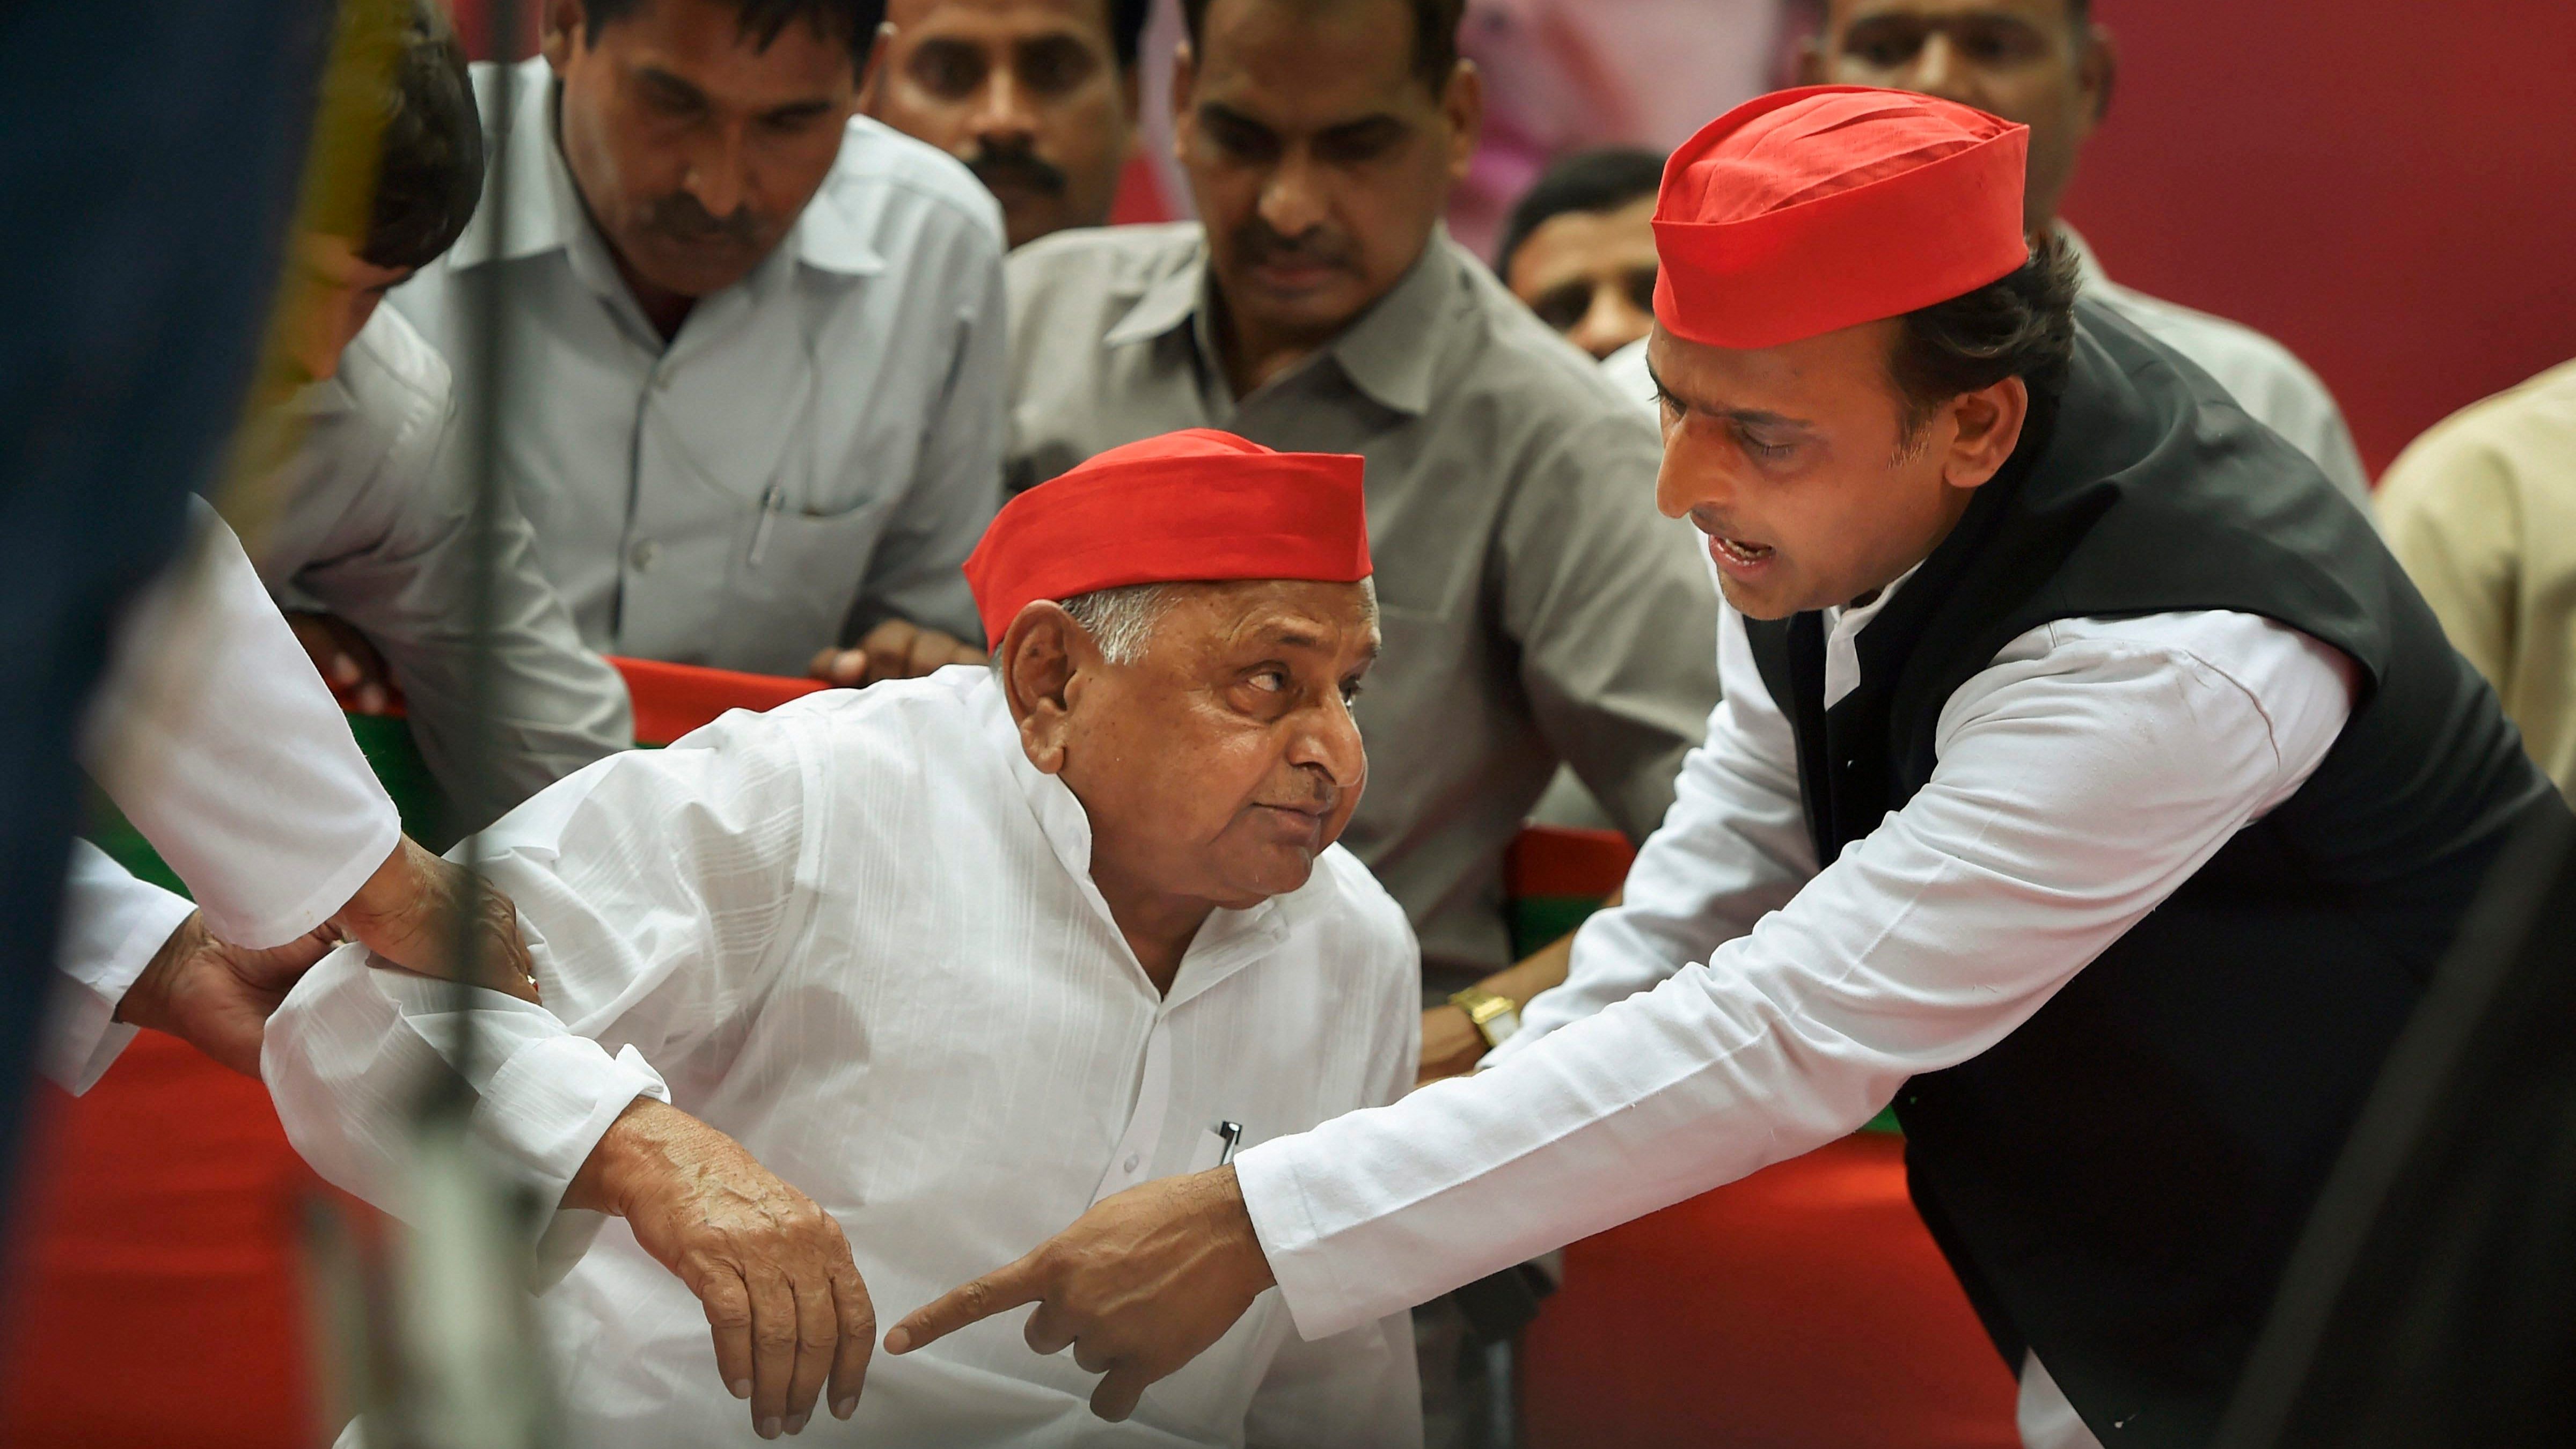 Mulayam, who was also credited with having the largest political clan in the country, chose Akhilesh Yadav, the son from his first wife, as his political successor after the SP won the assembly polls in UP in 2012 over his younger brother Shivpal Singh Yadav, who was among the founders of the party. Credit: PTI File Photo